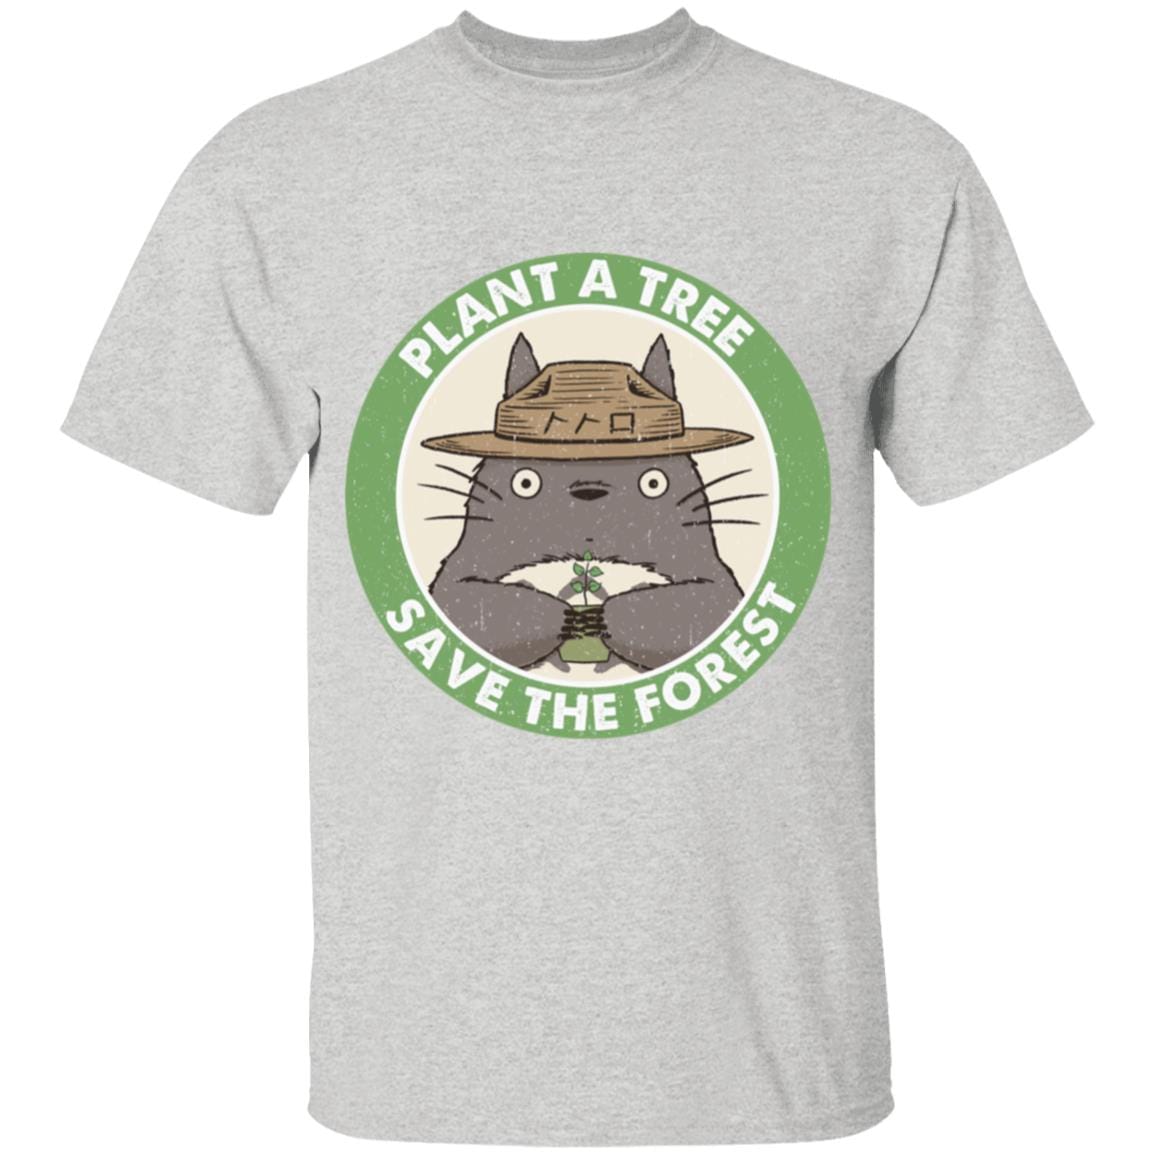 My Neighbor Totoro – Plant a Tree Save the Forest Kid T Shirt